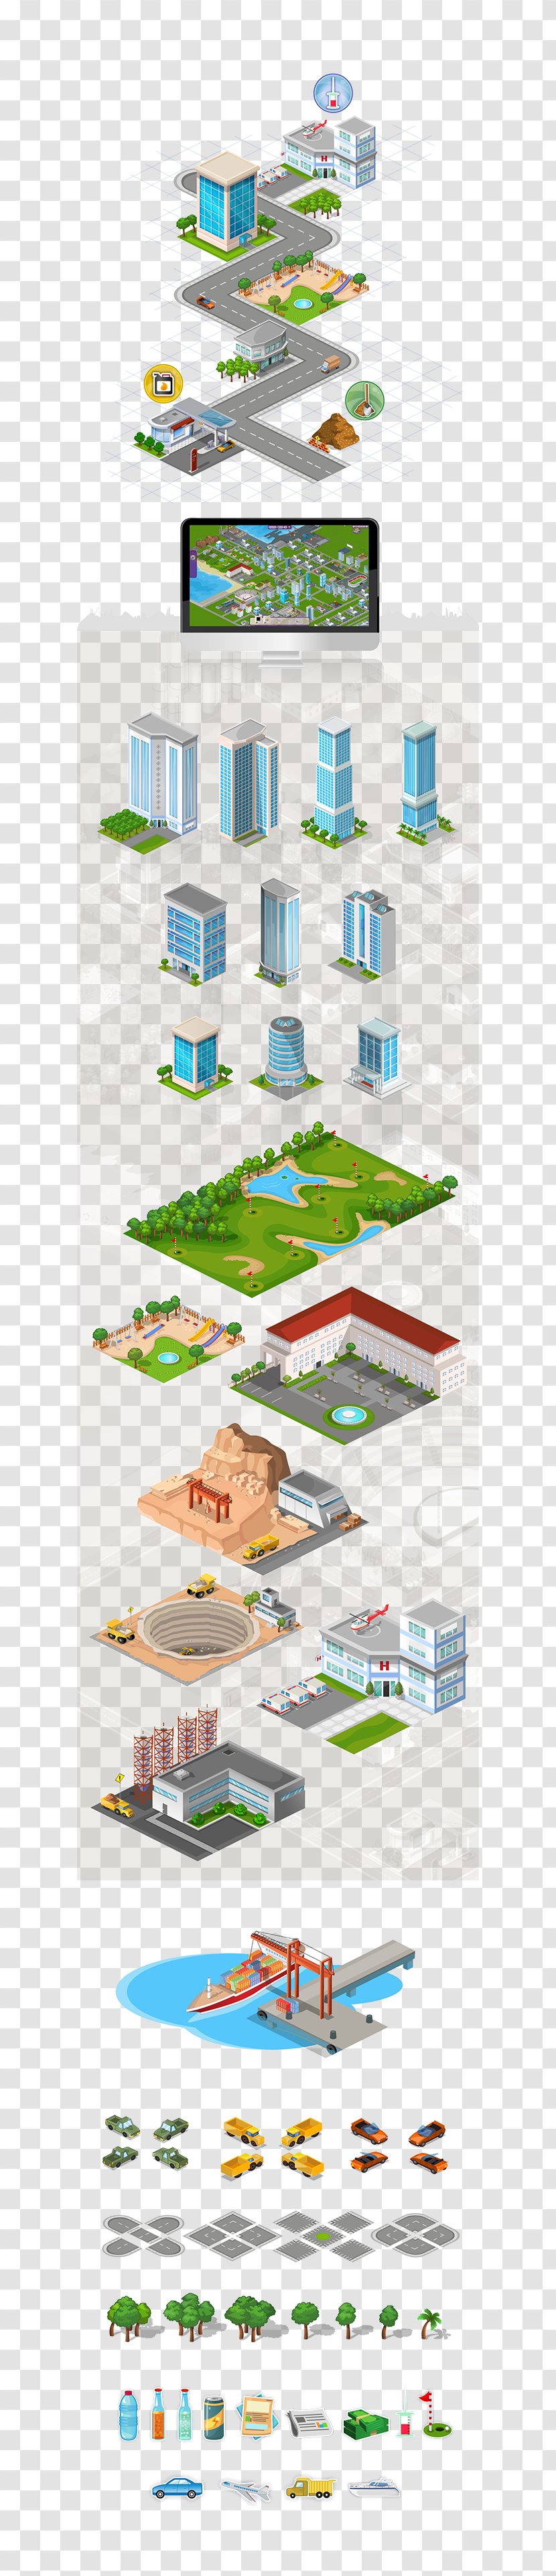 Isometric Graphics In Video Games And Pixel Art Graphic Design - Projection Transparent PNG